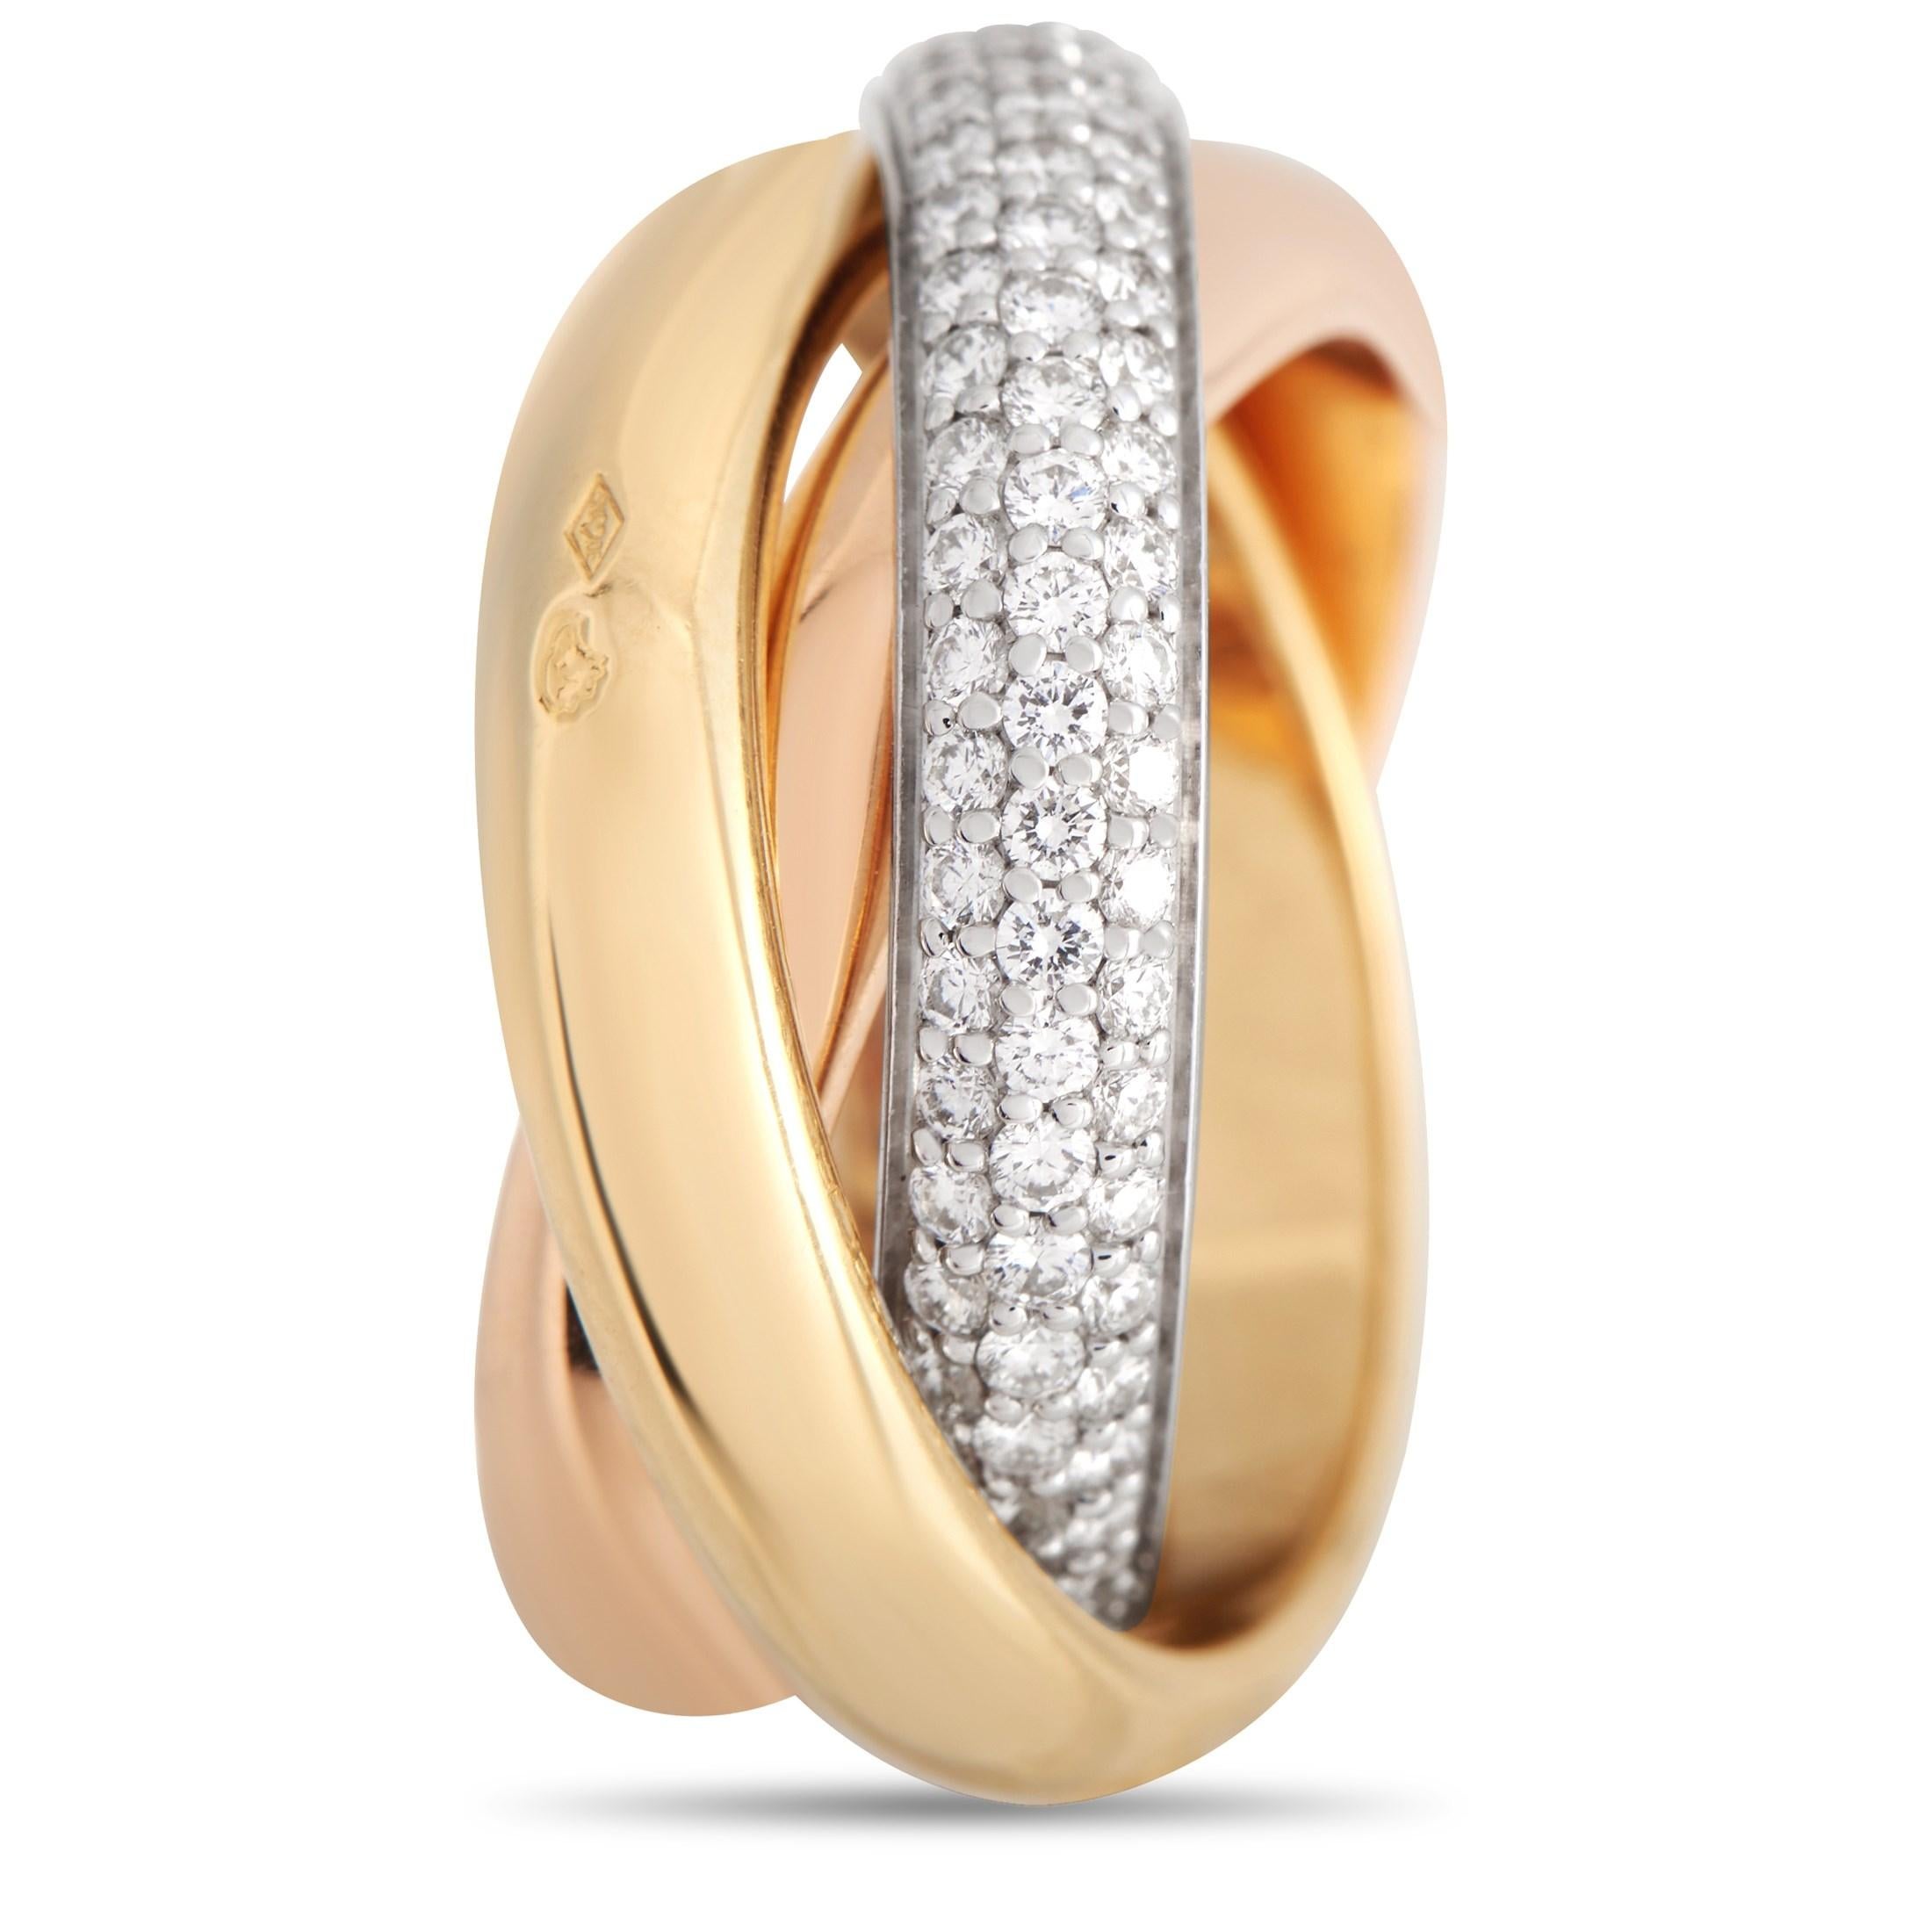 A dynamic design makes this Cartier Trinity ring a luxury piece that will never go out of style. The trio of interwoven bands made from 18K Rose Gold, 18K Yellow Gold, and 18K White Gold add color and dimension to this captivating piece of jewelry.